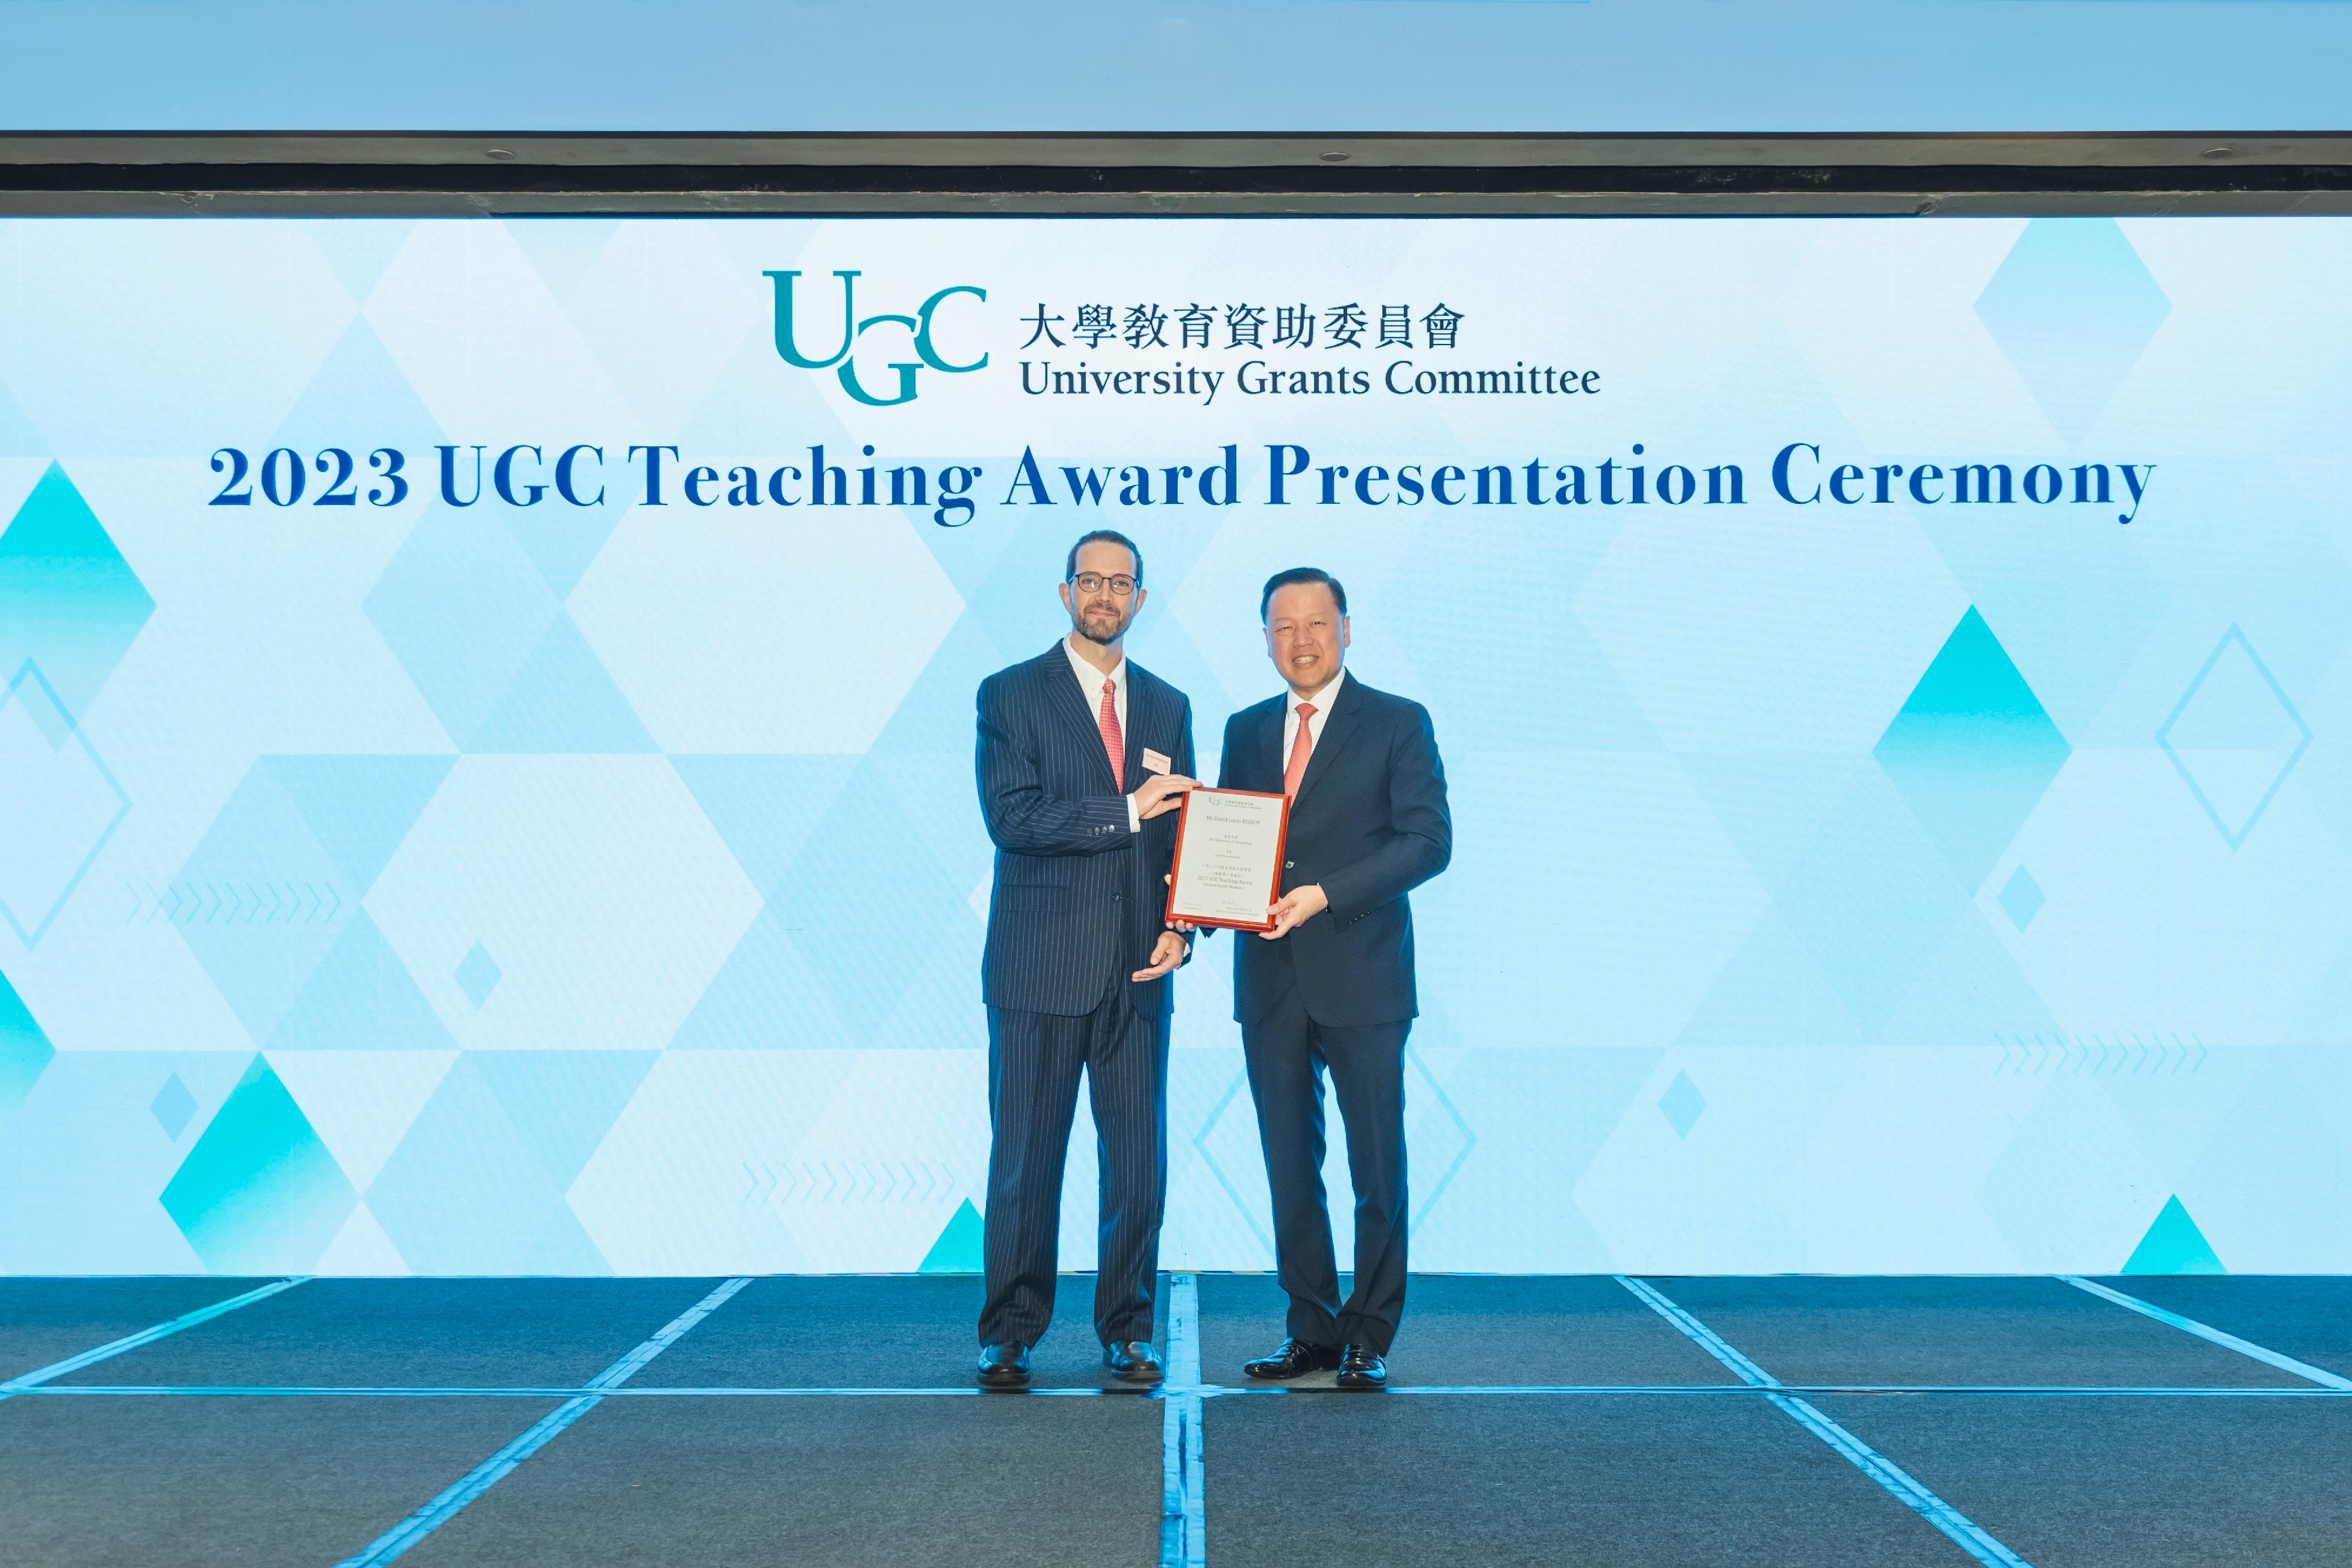 The Chairman of the University Grants Committee (UGC), Mr Tim Lui (right), today (September 27) presents the 2023 UGC Teaching Award for General Faculty Members to Mr David Lorin Bishop (left) of the University of Hong Kong.